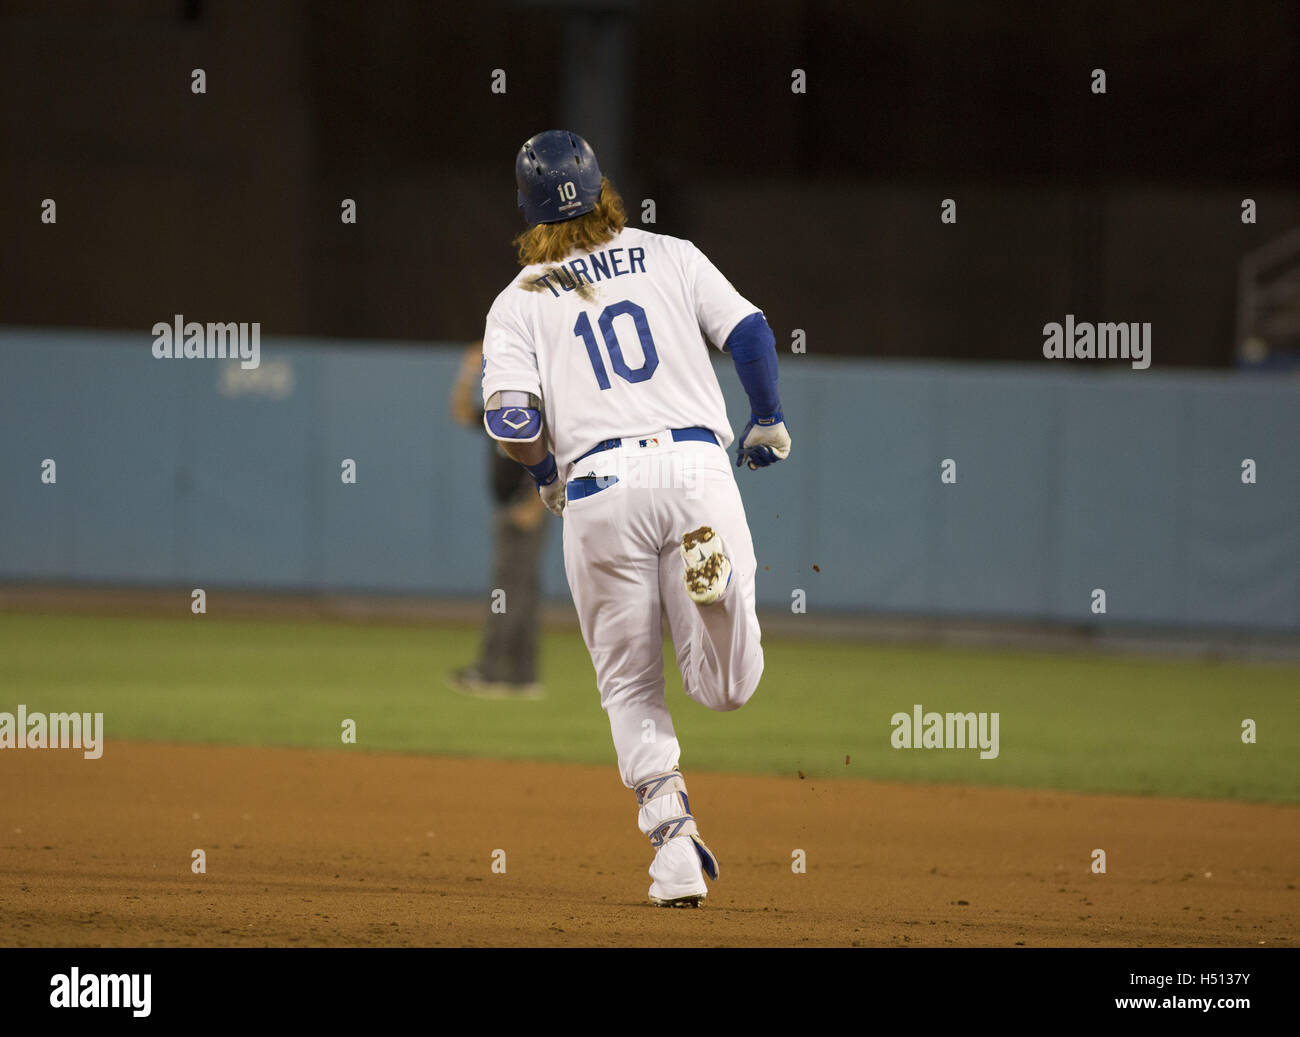 Los Angeles, CALIFORNIA, UNITED STATES OF AMERICA, USA. 18th Oct, 2016. Justin Turner (10) of the Los Angeles Dodgers runs the bases after hitting a home run against the Chicago Cubs in the fifth inning of game three of the National League Championship Series at Dodger Stadium on October 18, 2016 in Los Angeles, California.Los Angeles Dodgers won the game 6-0 to take the lead 2 games to 1 .ARMANDO ARORIZO Credit:  Armando Arorizo/Prensa Internacional/ZUMA Wire/Alamy Live News Stock Photo